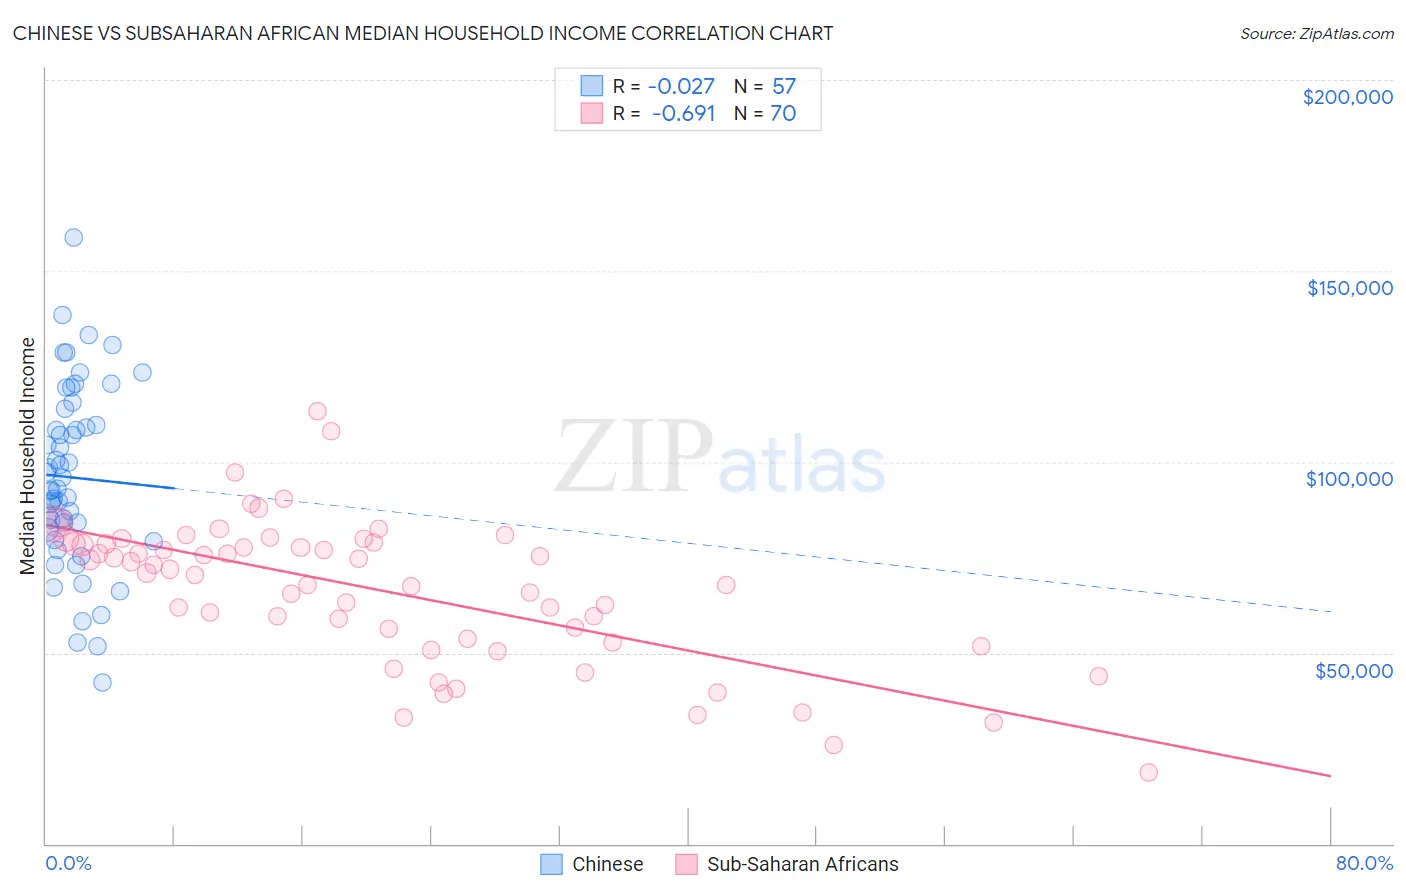 Chinese vs Subsaharan African Median Household Income